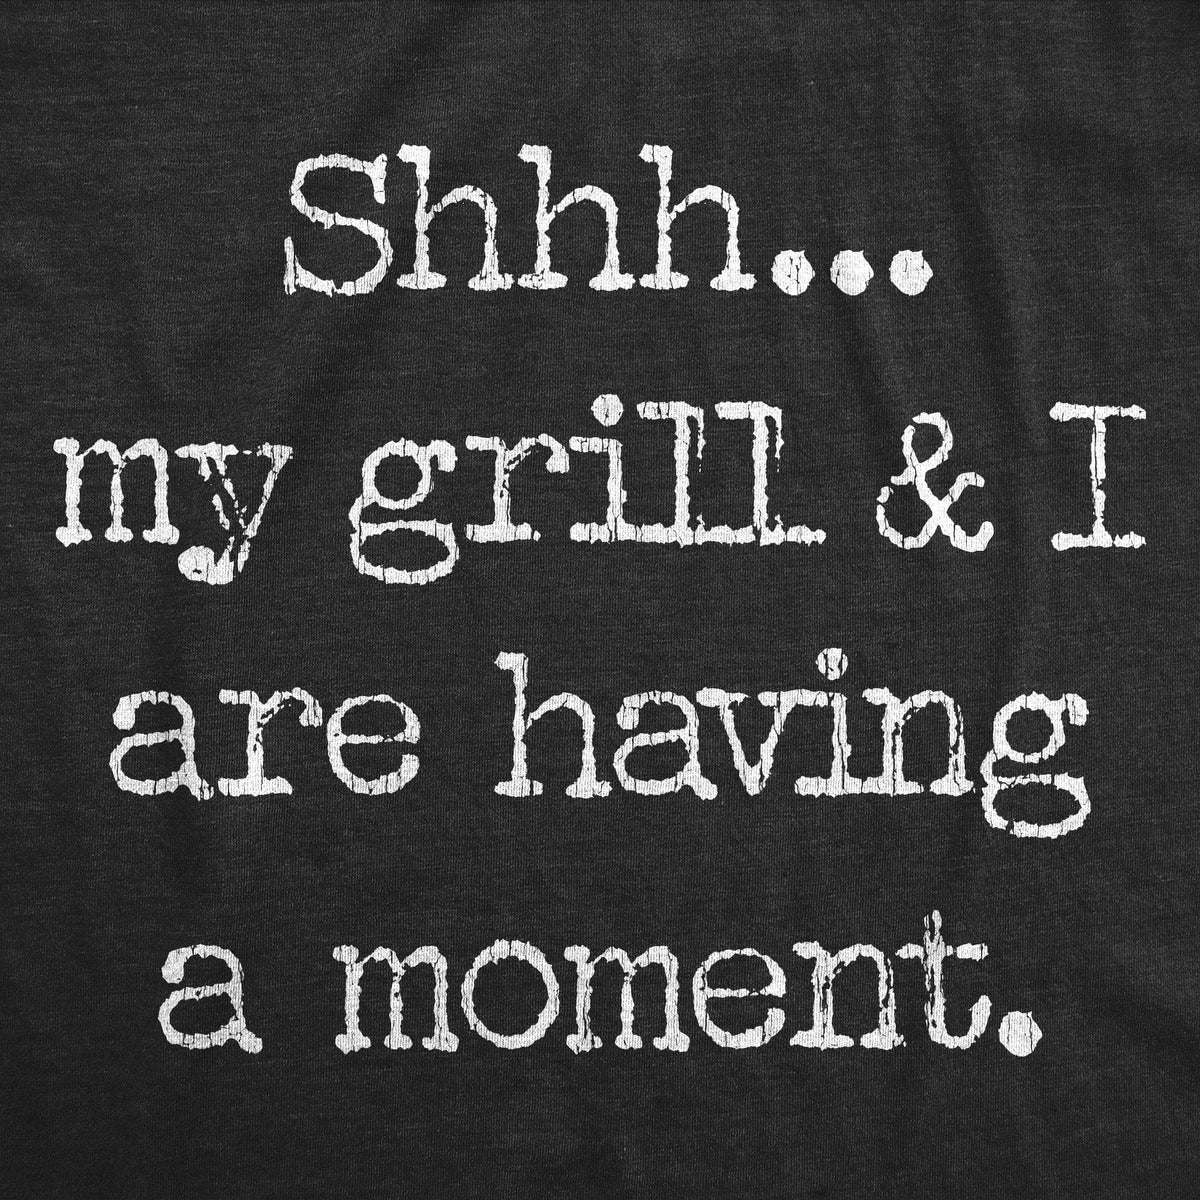 Shhh… My Grill And I Are Having A Moment Men&#39;s Tshirt - Crazy Dog T-Shirts